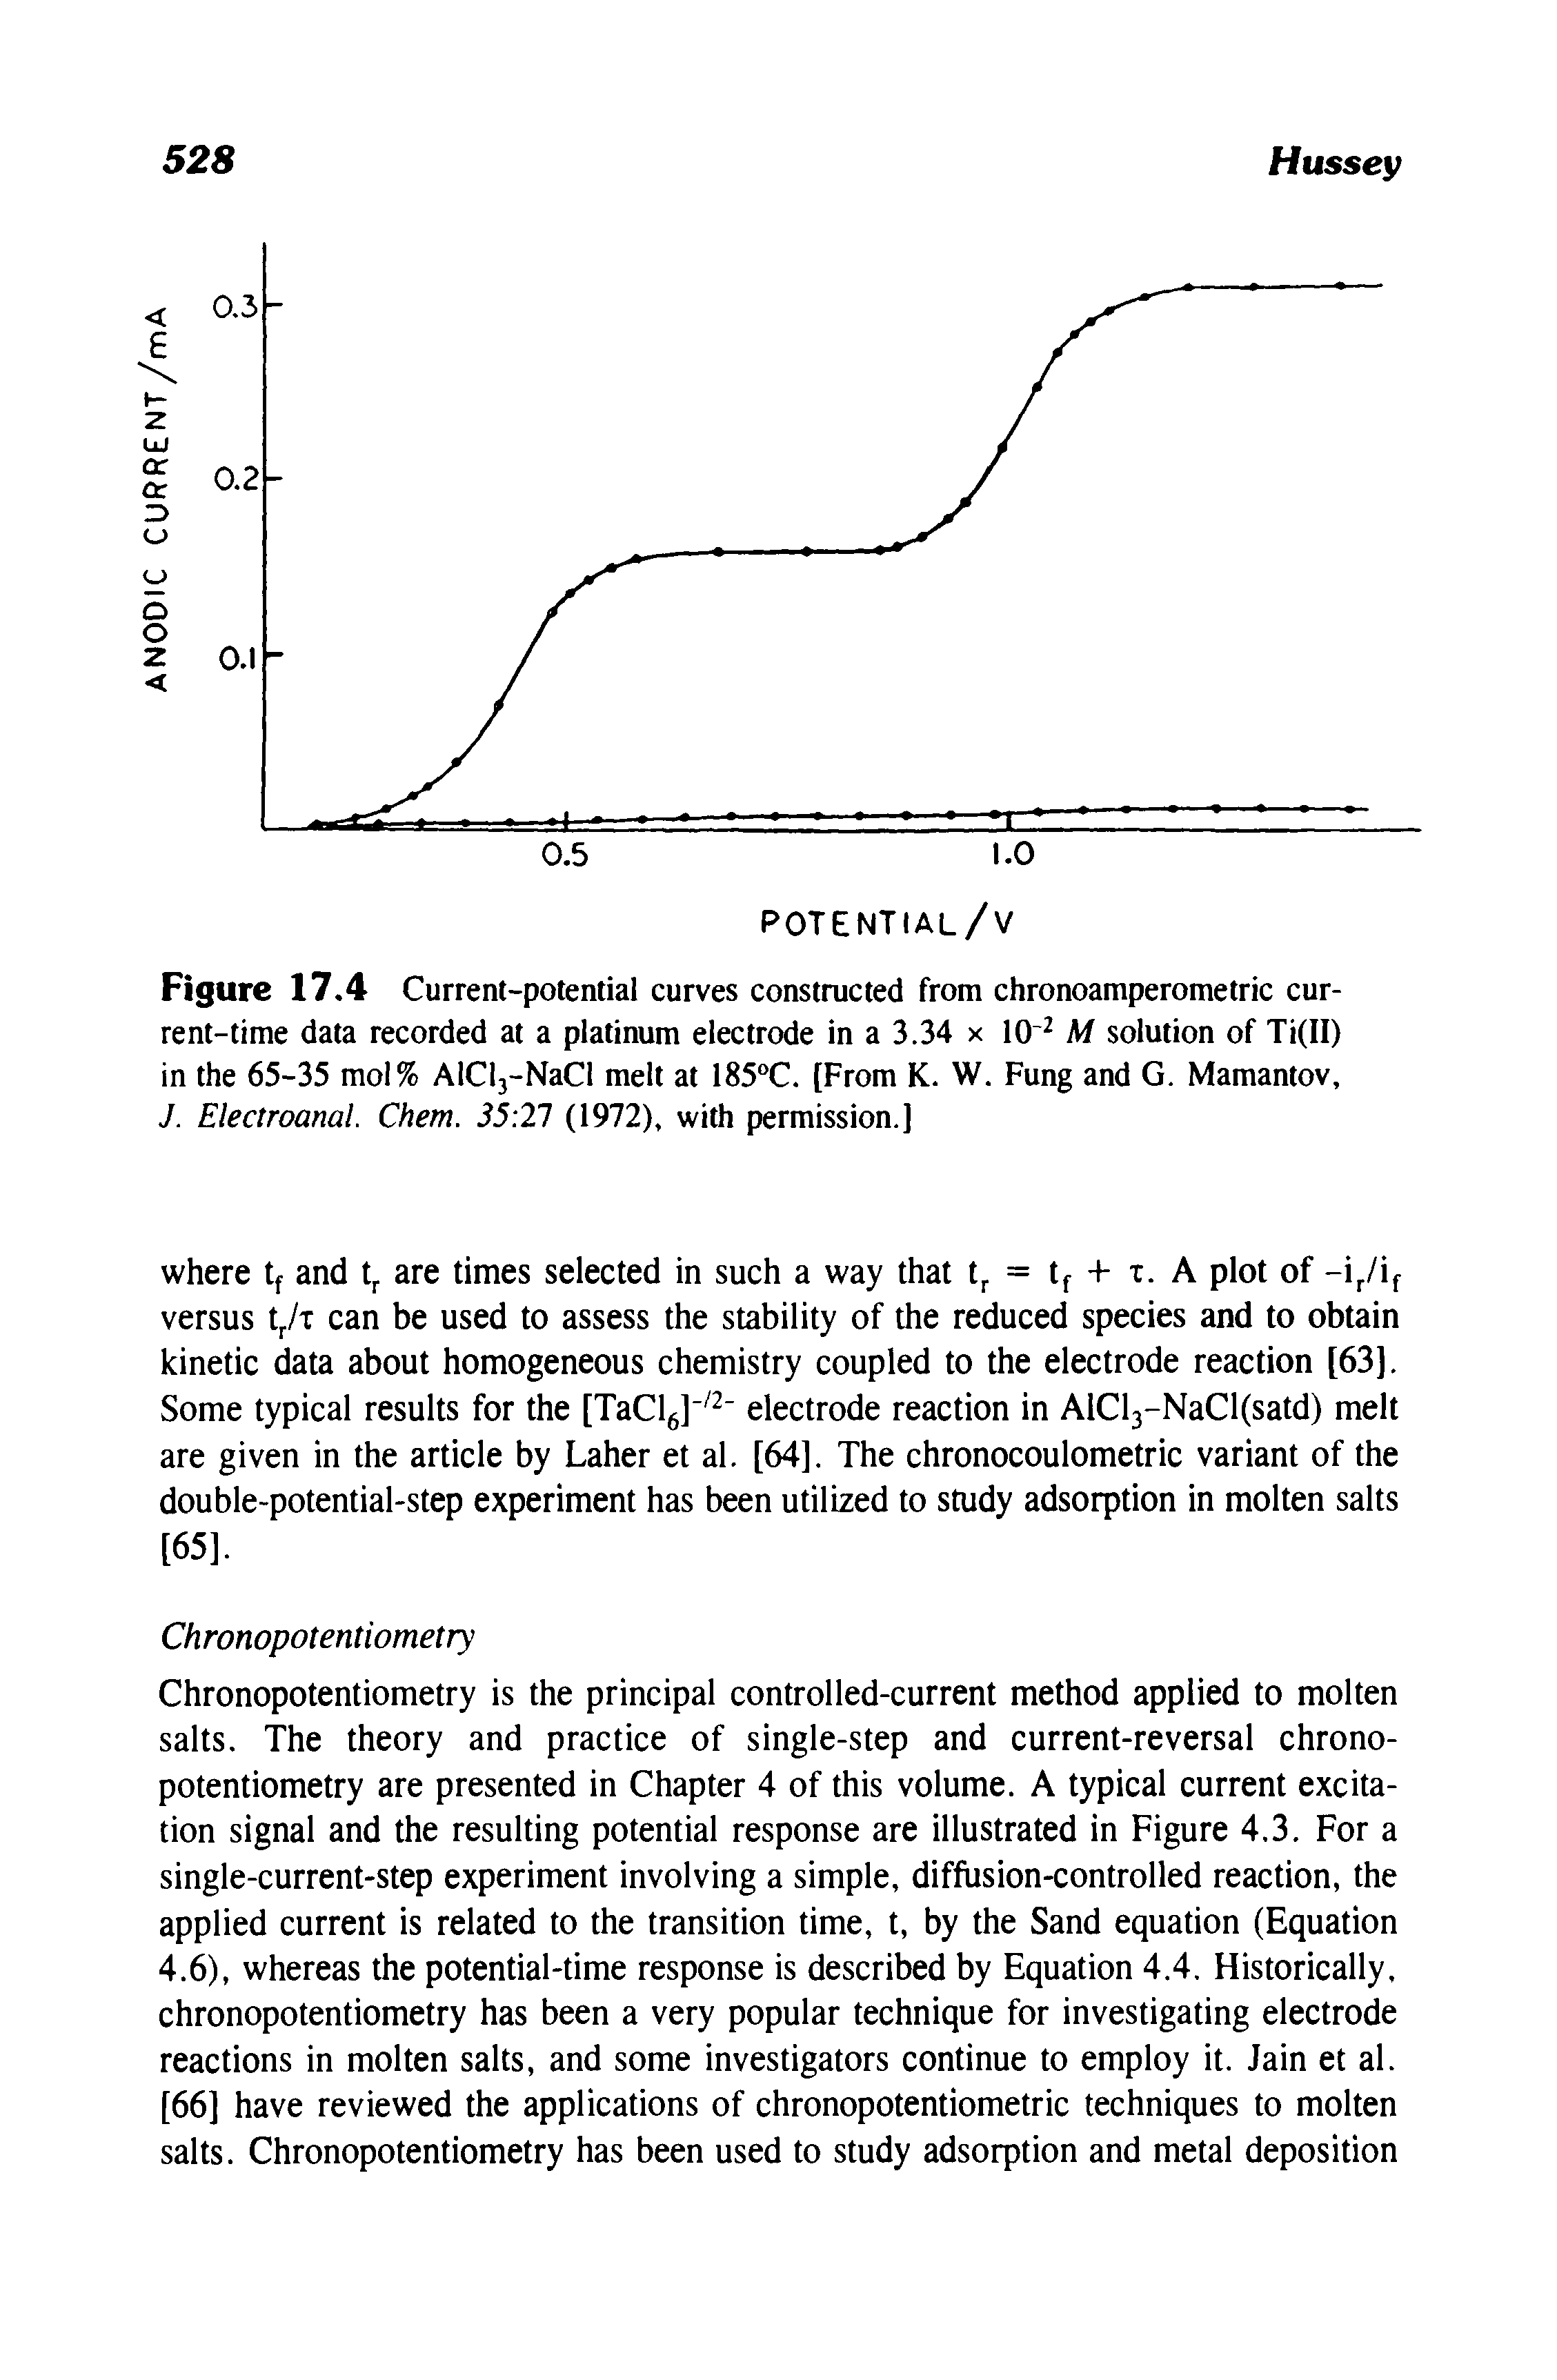 Figure 17.4 Current-potential curves constructed from chronoamperometric current-time data recorded at a platinum electrode in a 3.34 x 10 2 M solution of Ti(II) in the 65-35 mol% AlCl3-NaCl melt at 185°C. [From K. W. Fung and G. Mamantov, J. Electroanal. Chem. 35 21 (1972), with permission.]...